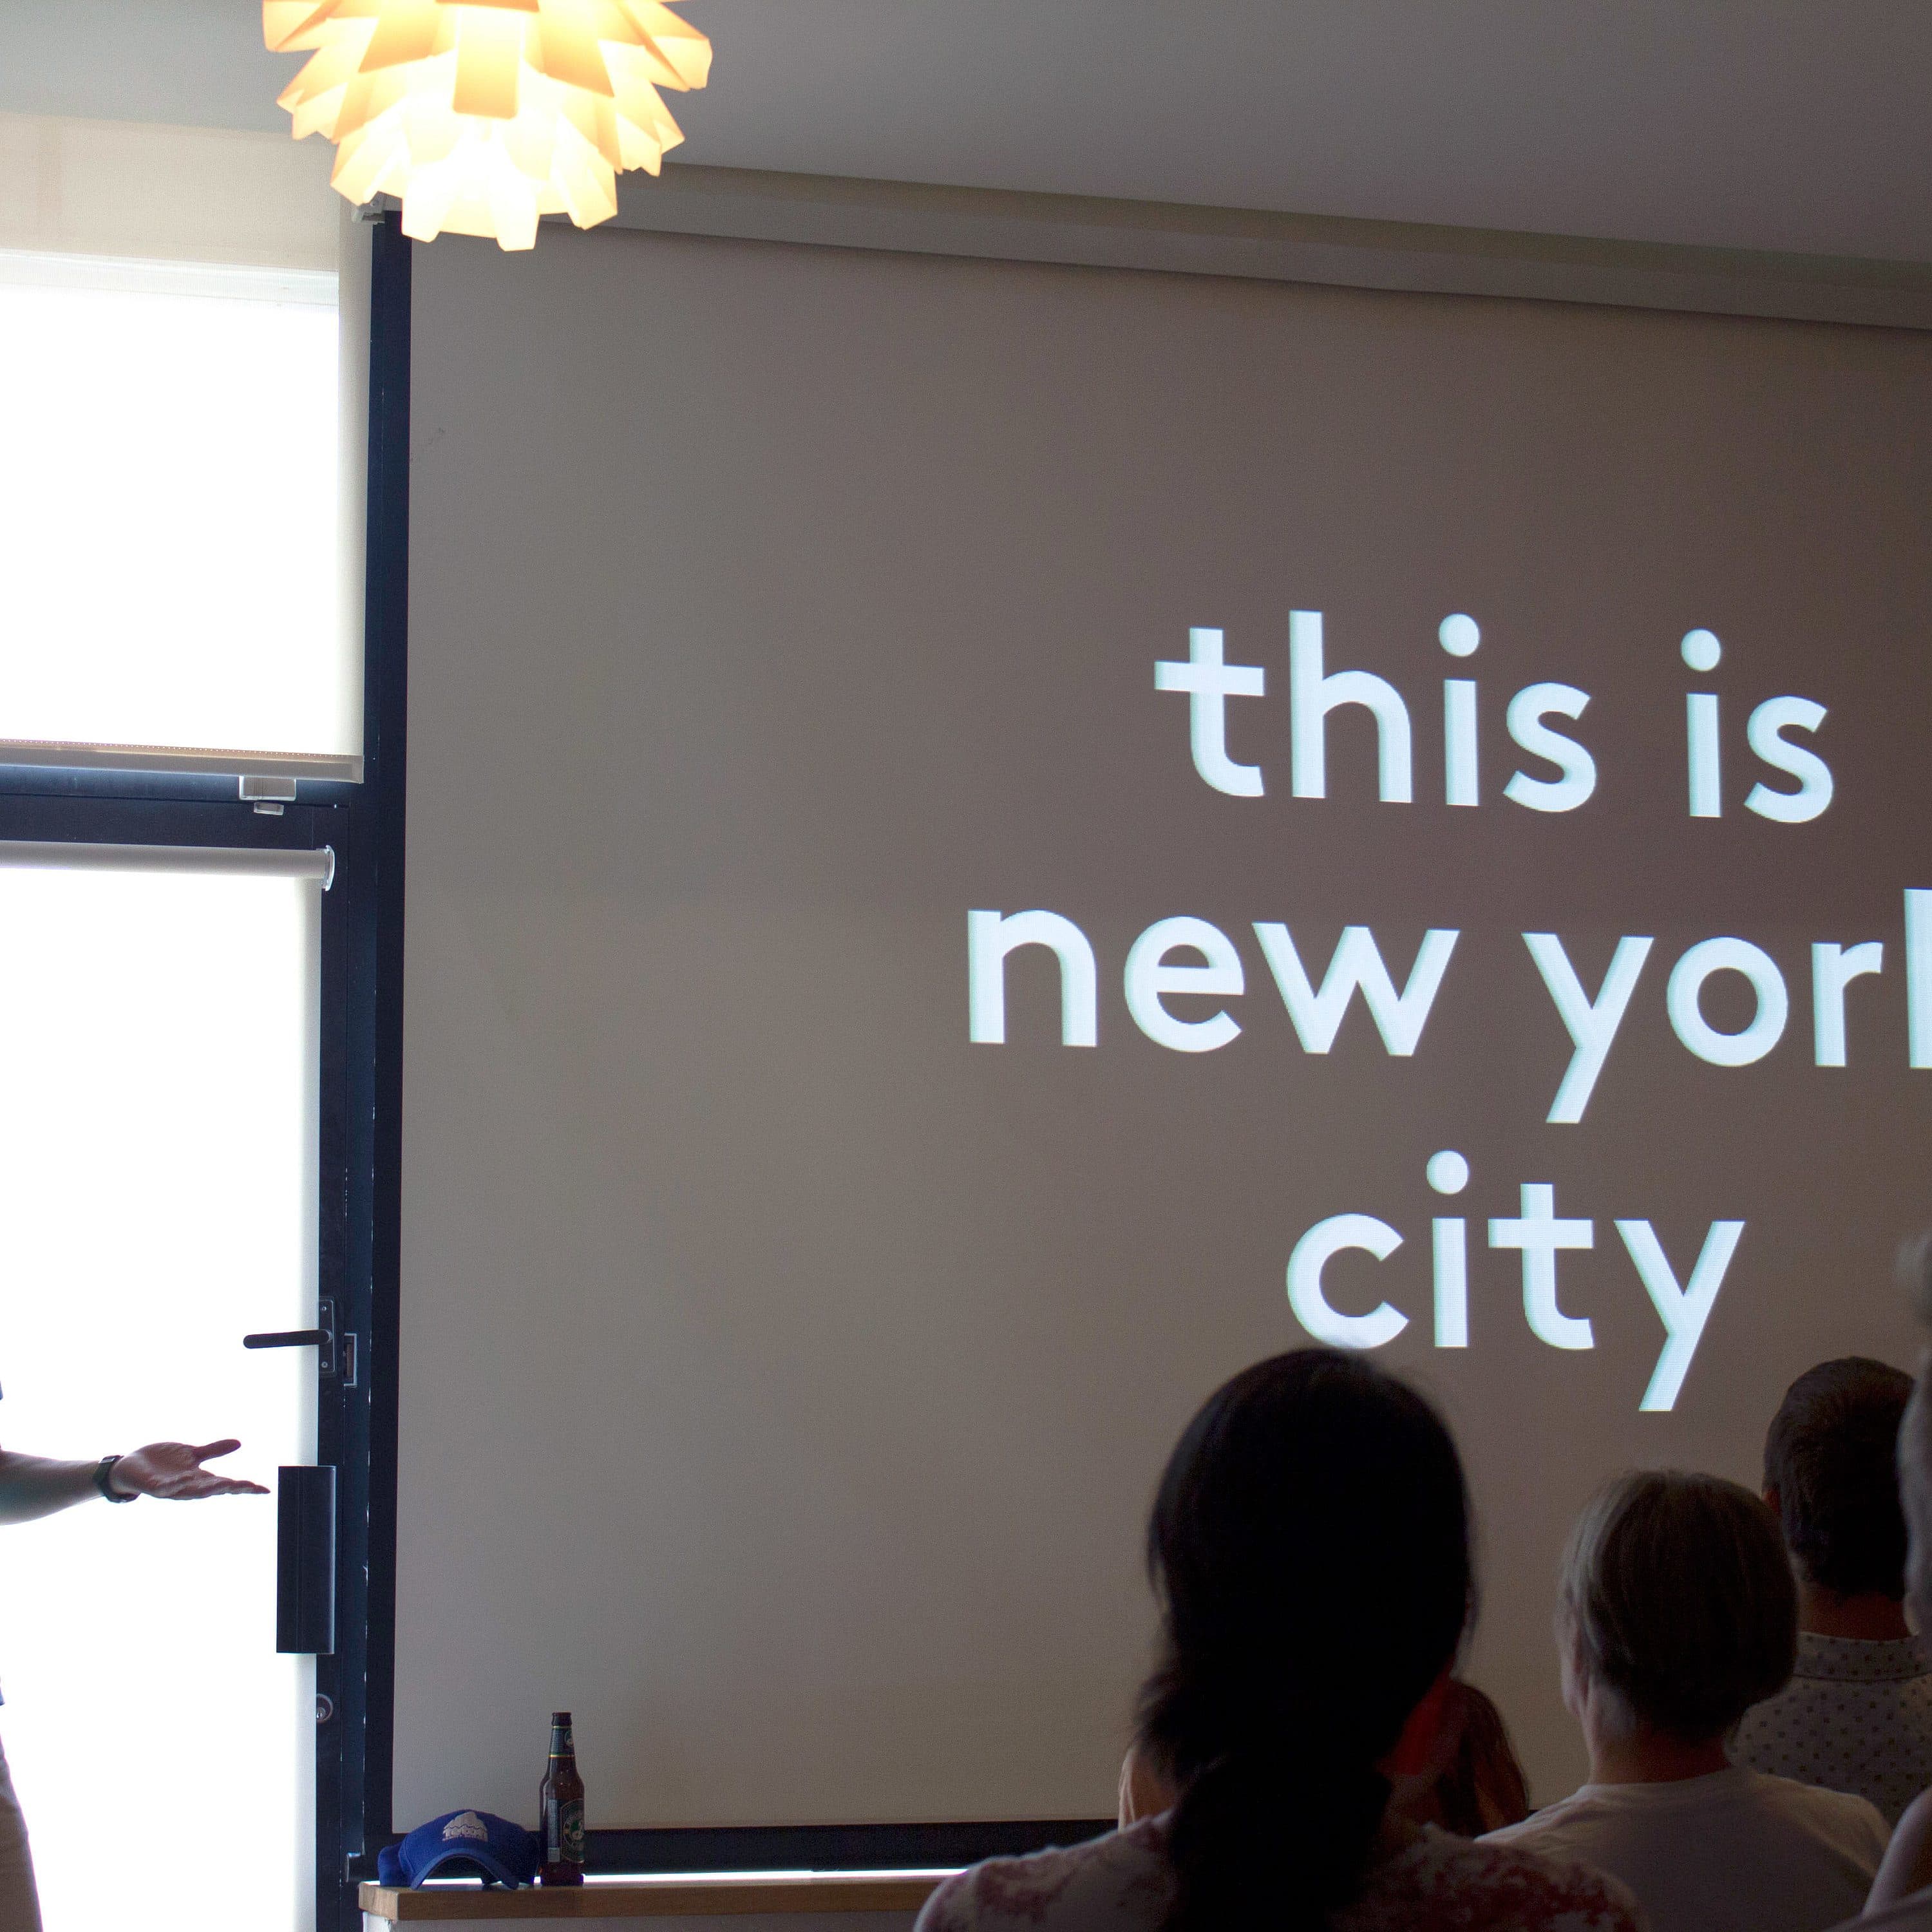 A person stands in front of an audience, presenting a slide that reads "this is new york city." The presentation is indoors with modern lighting fixtures visible on the ceiling. The person appears to be gesturing while speaking, holding a remote in one hand.